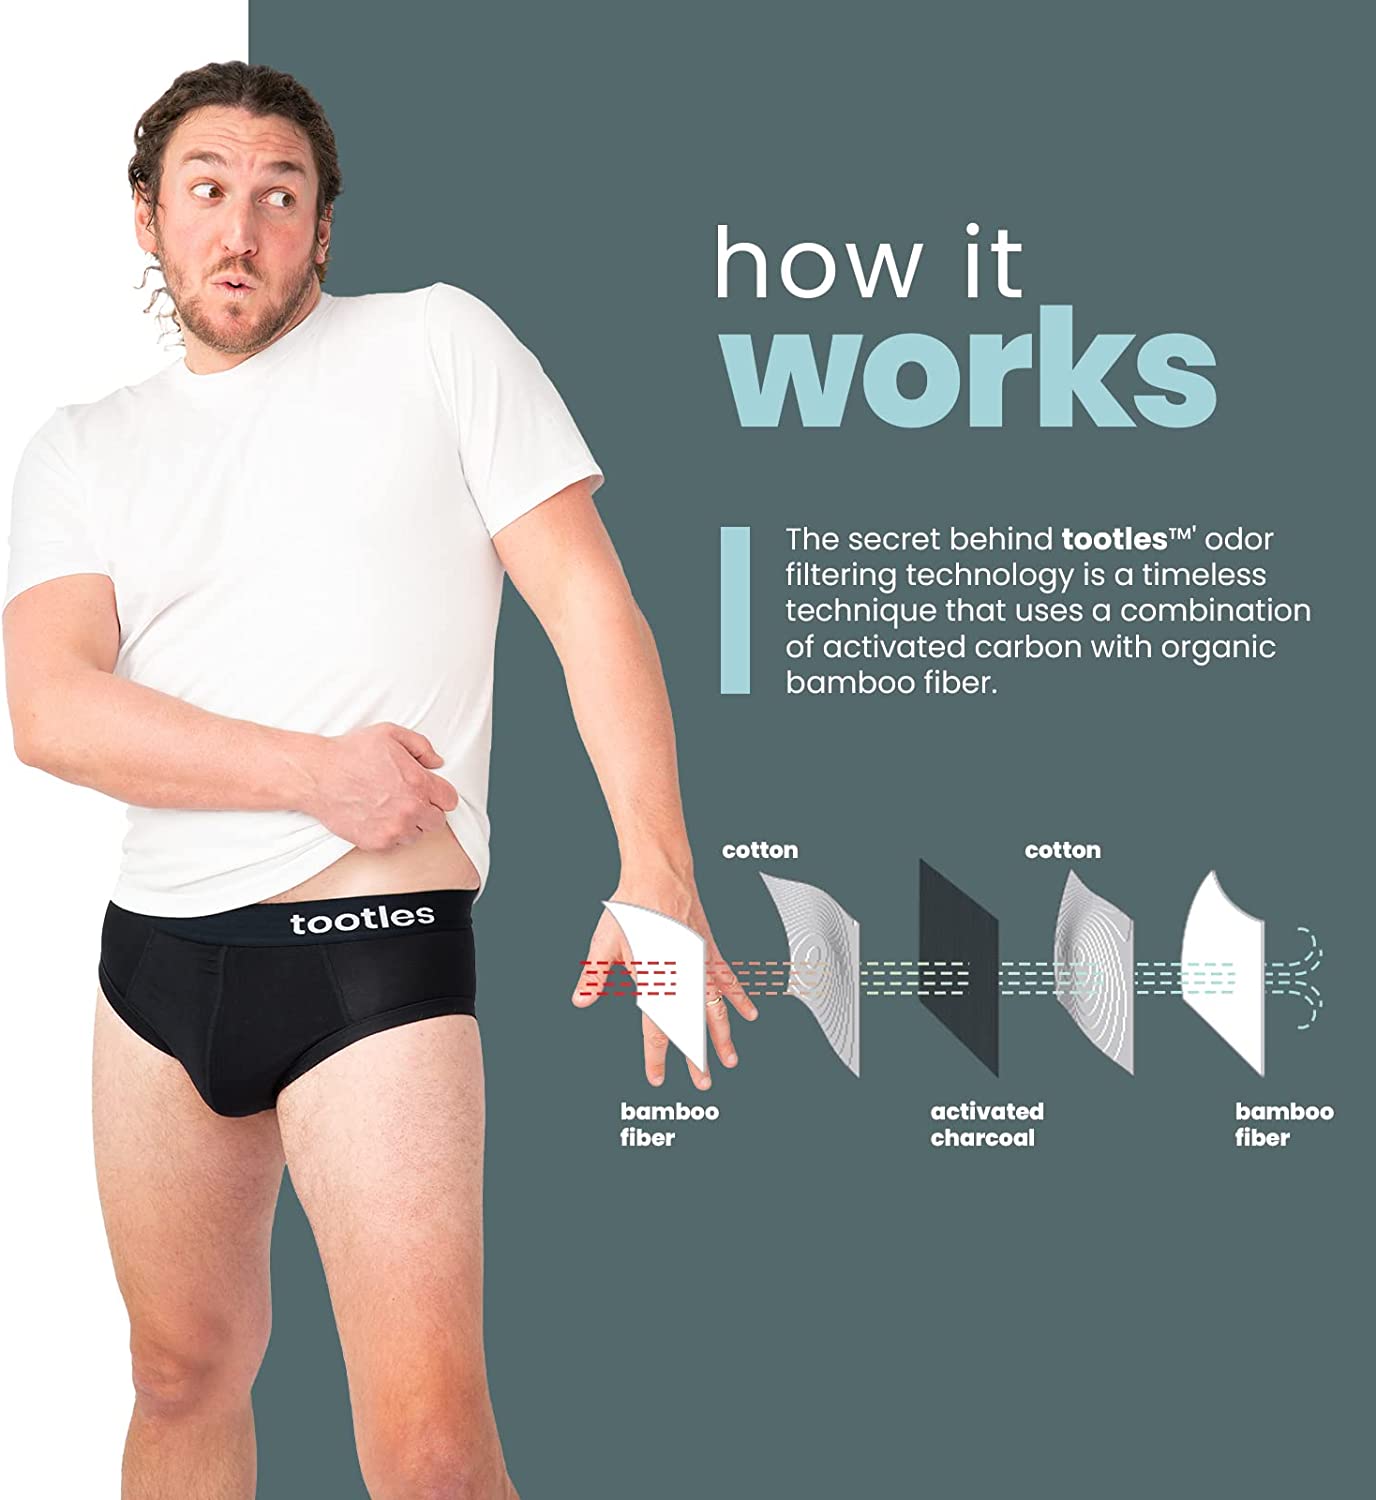 New underwear uses science of chemical warfare defense to filter farts